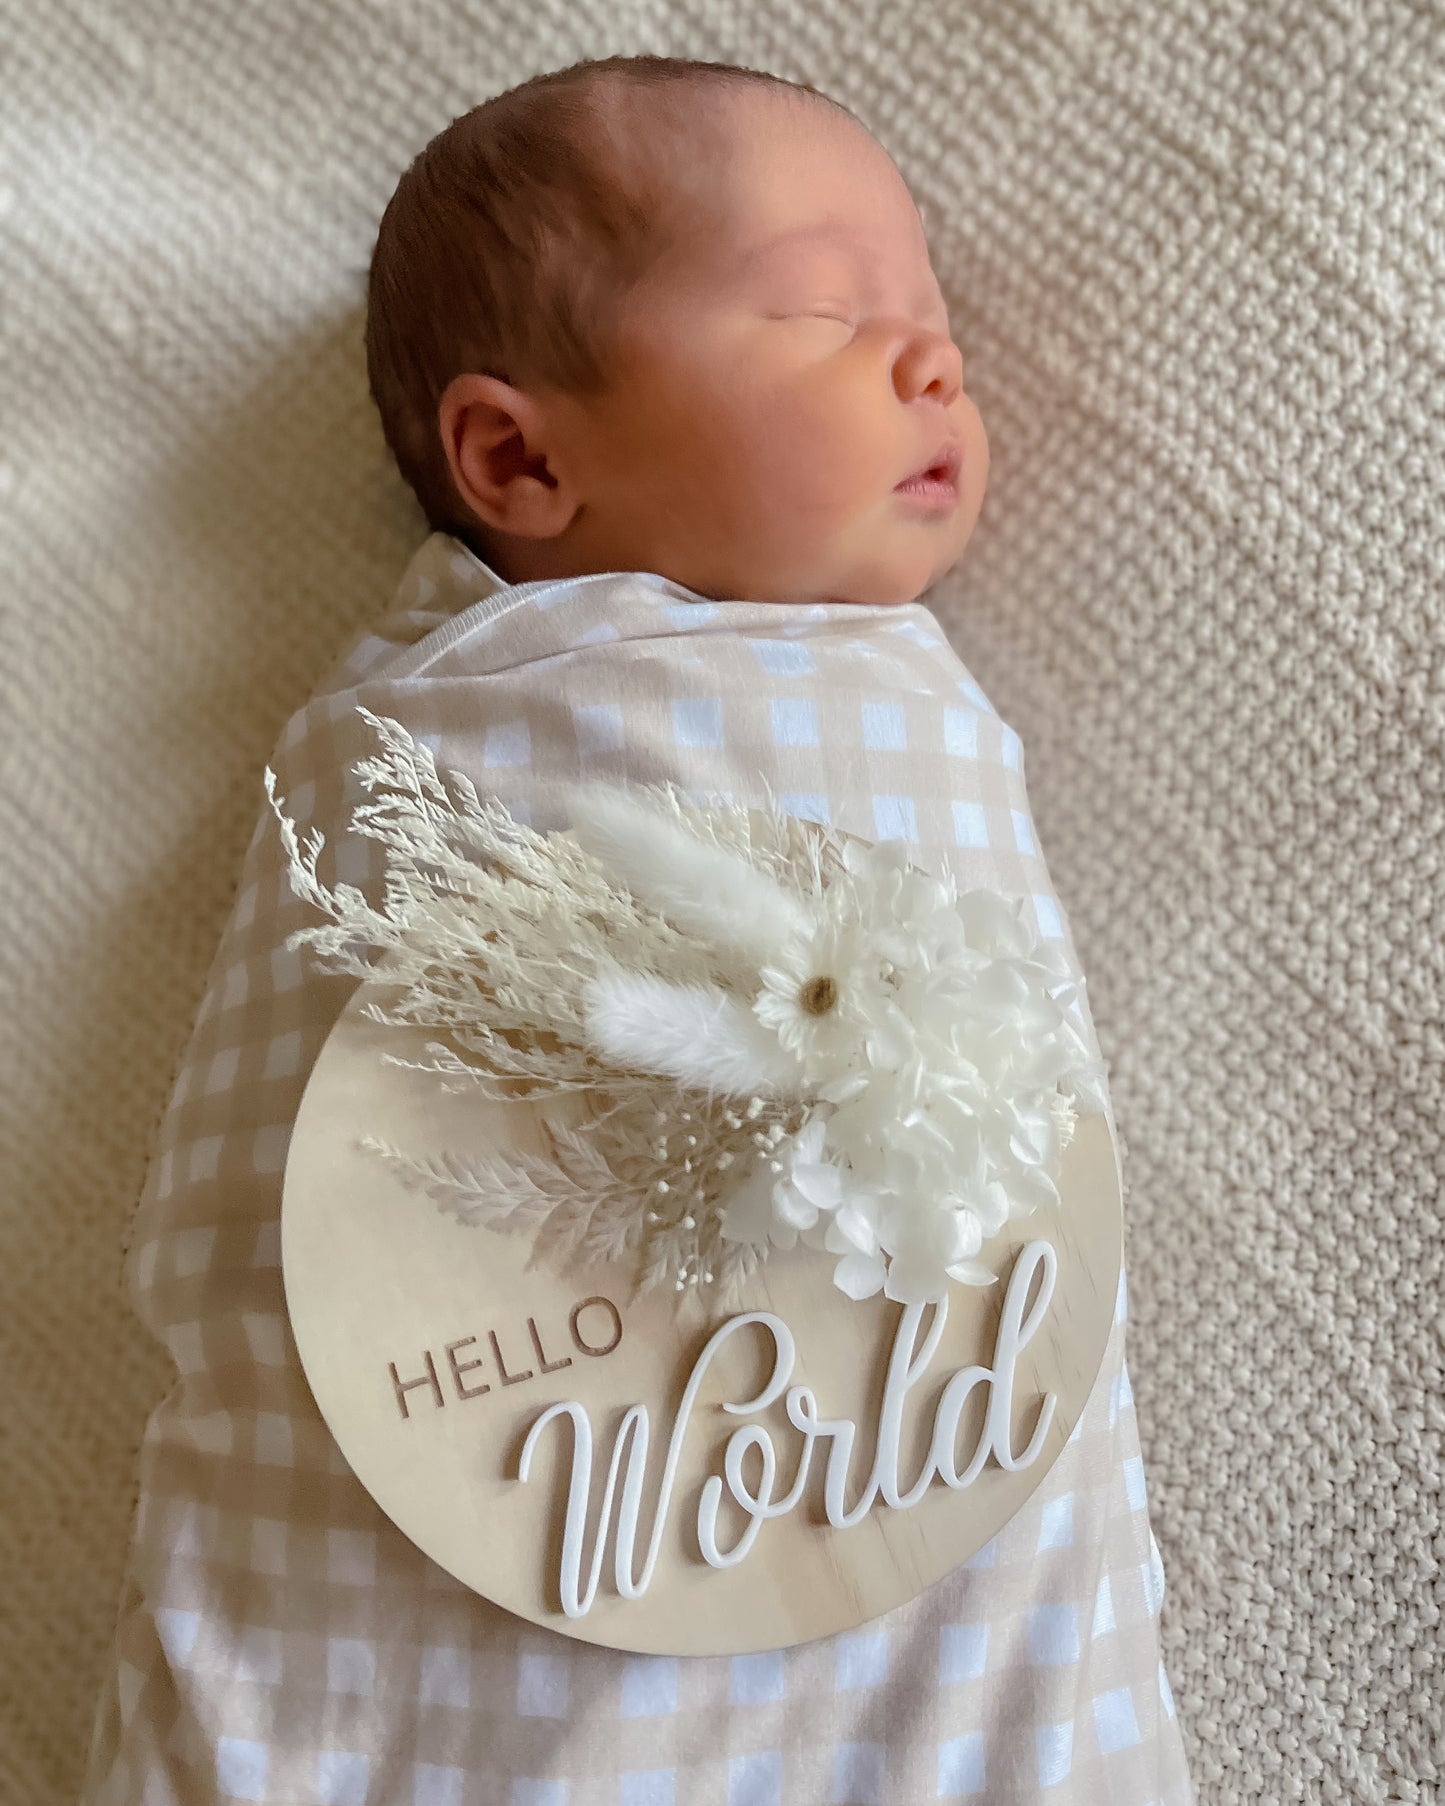 Hello World Announcement Plaque w/ dried flowers